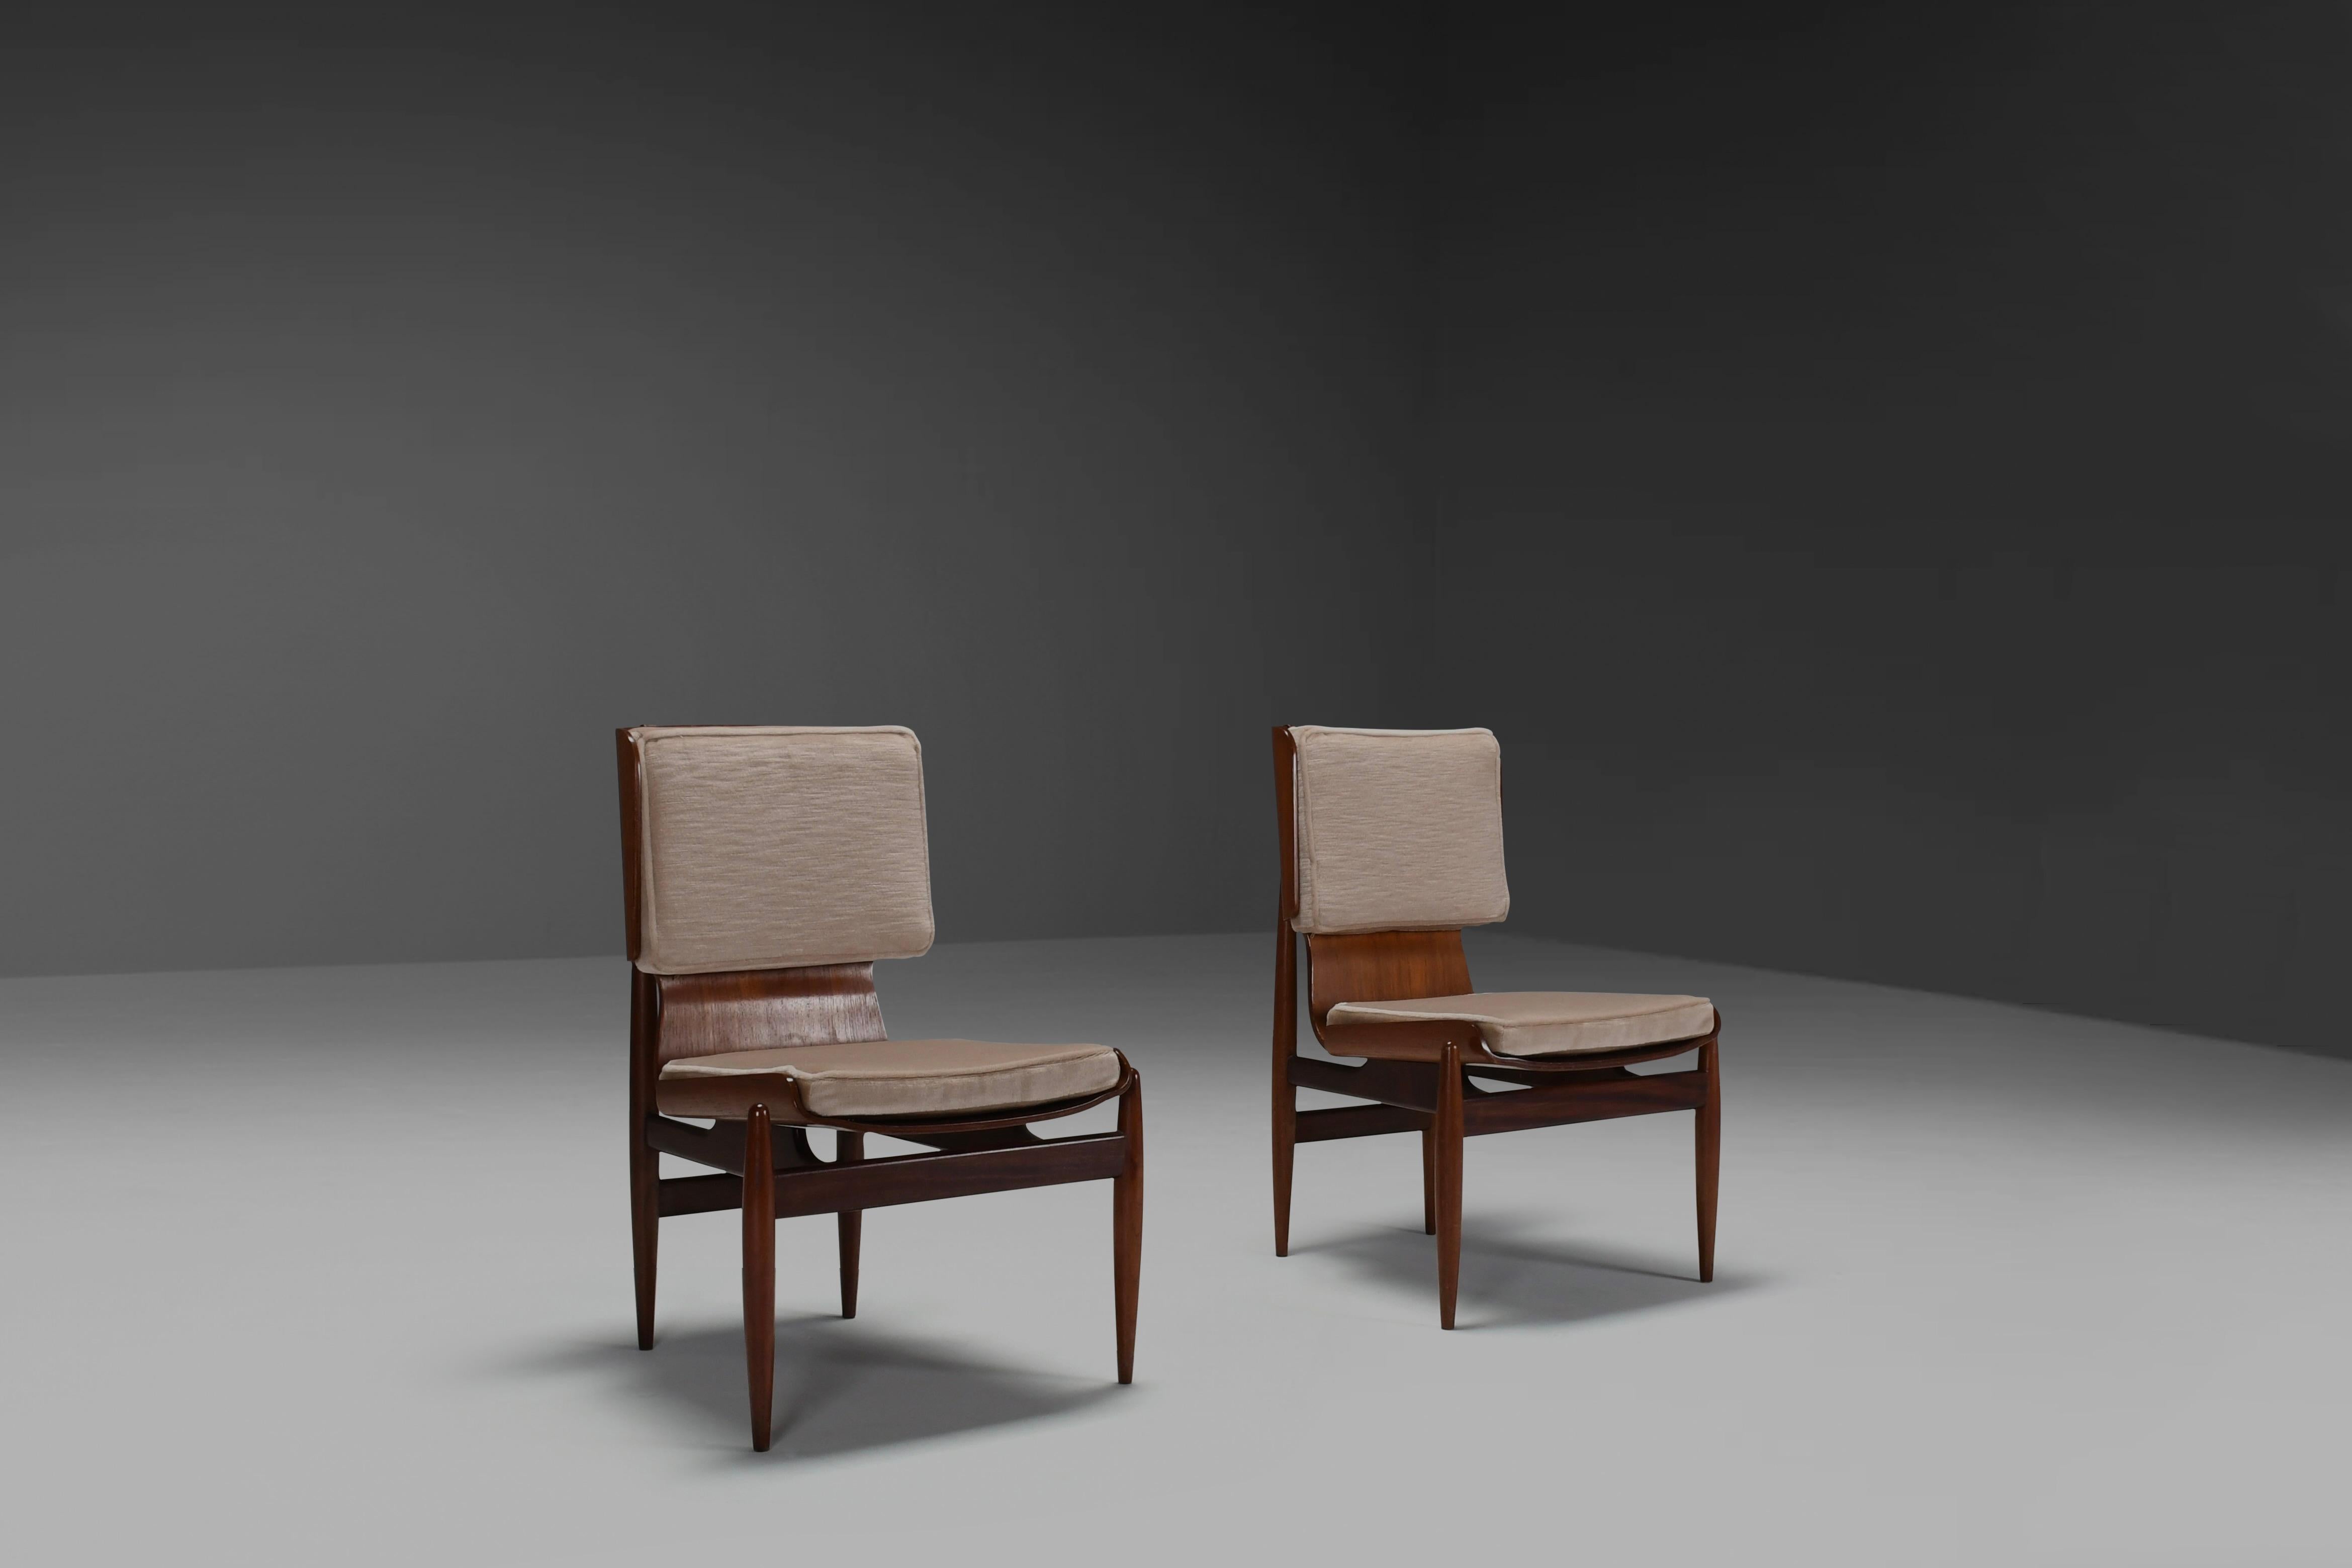 Beautifully crafted fside chairs in very good condition.

Manufactured by Barovero Turino in the 1960s.

The seating area has a wooden structure and is in fact a processed bent plywood shell. The different thicknesses of the wooden structure and the